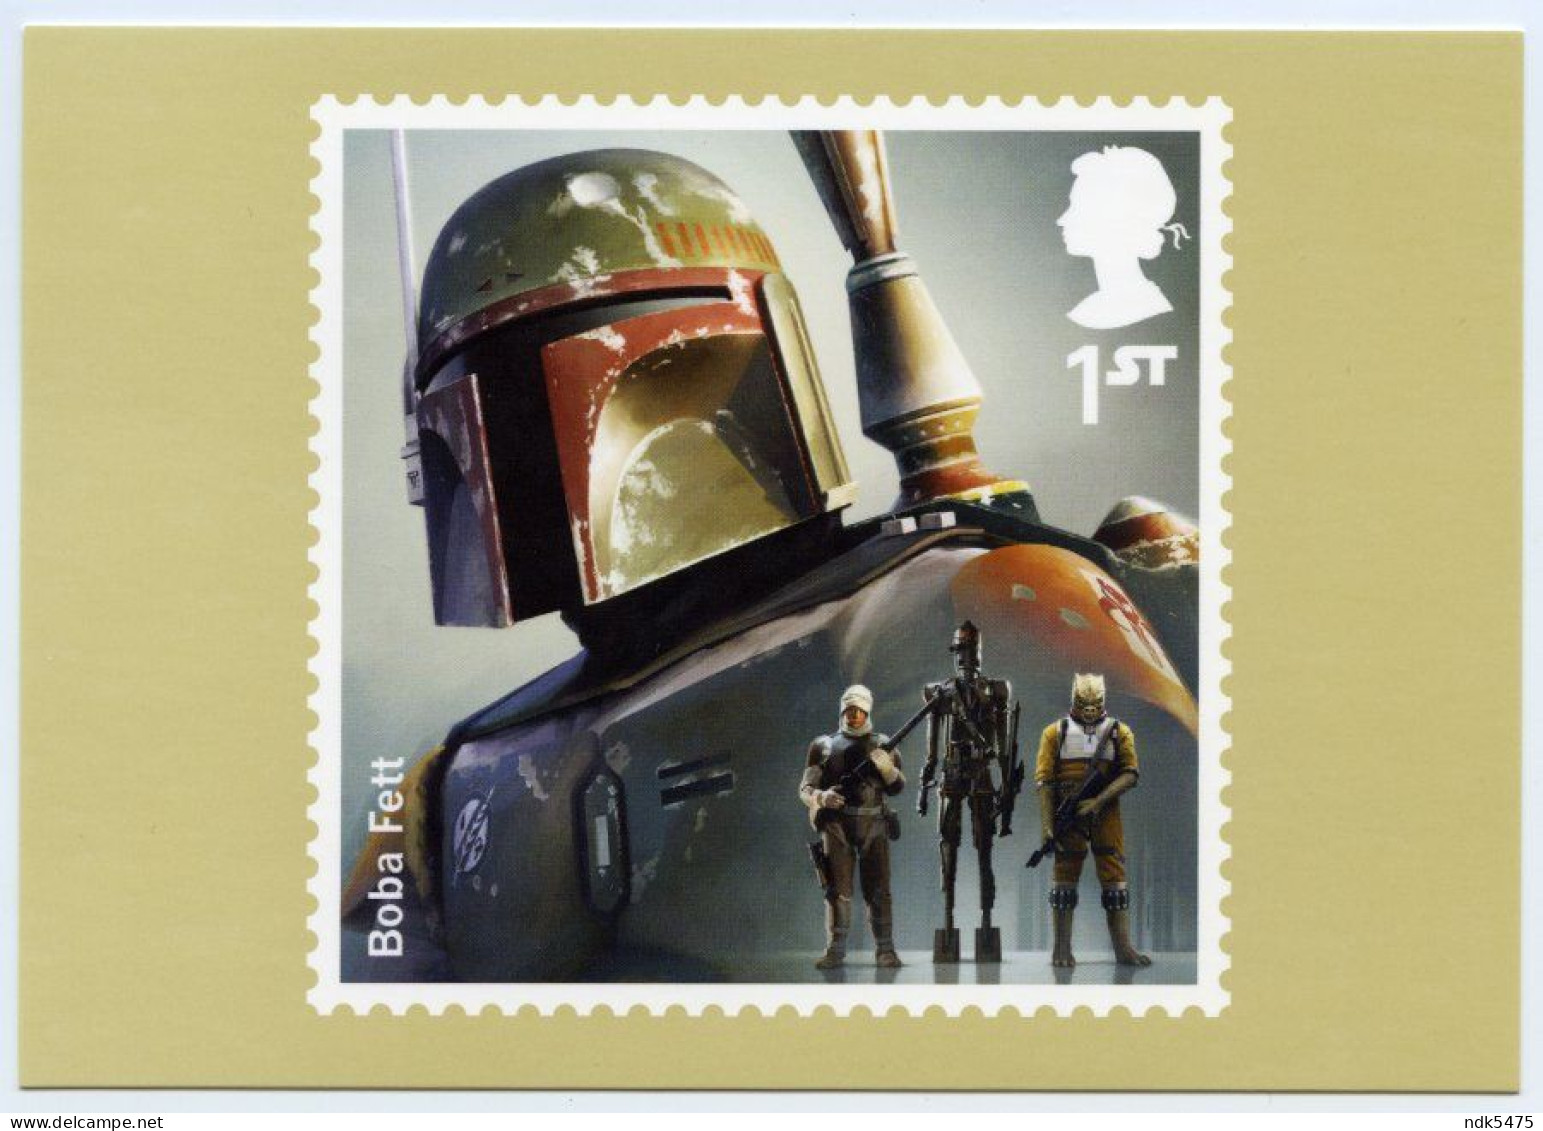 ROYAL MAIL : STAR WARS, 2015 : SET OF 6  (10 X 15cms Approx.) - PHQ Cards